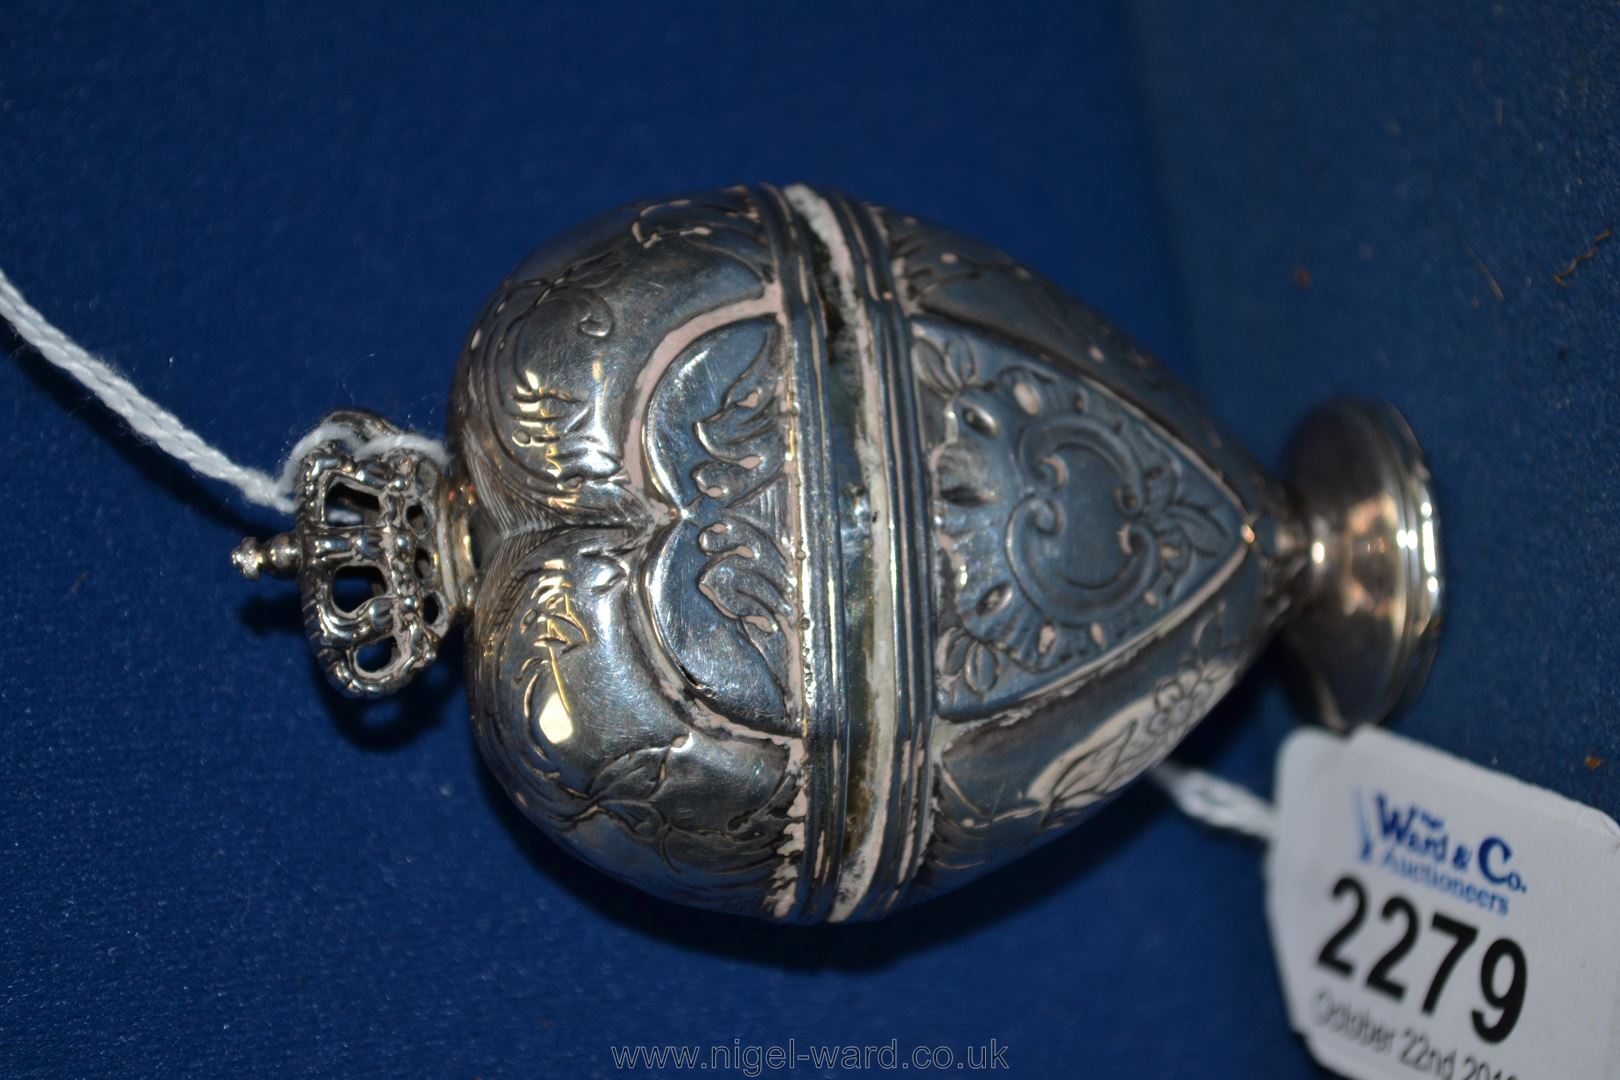 An attractive Danish silver heart shape spice box with crown finial (hovedvandsaeg).